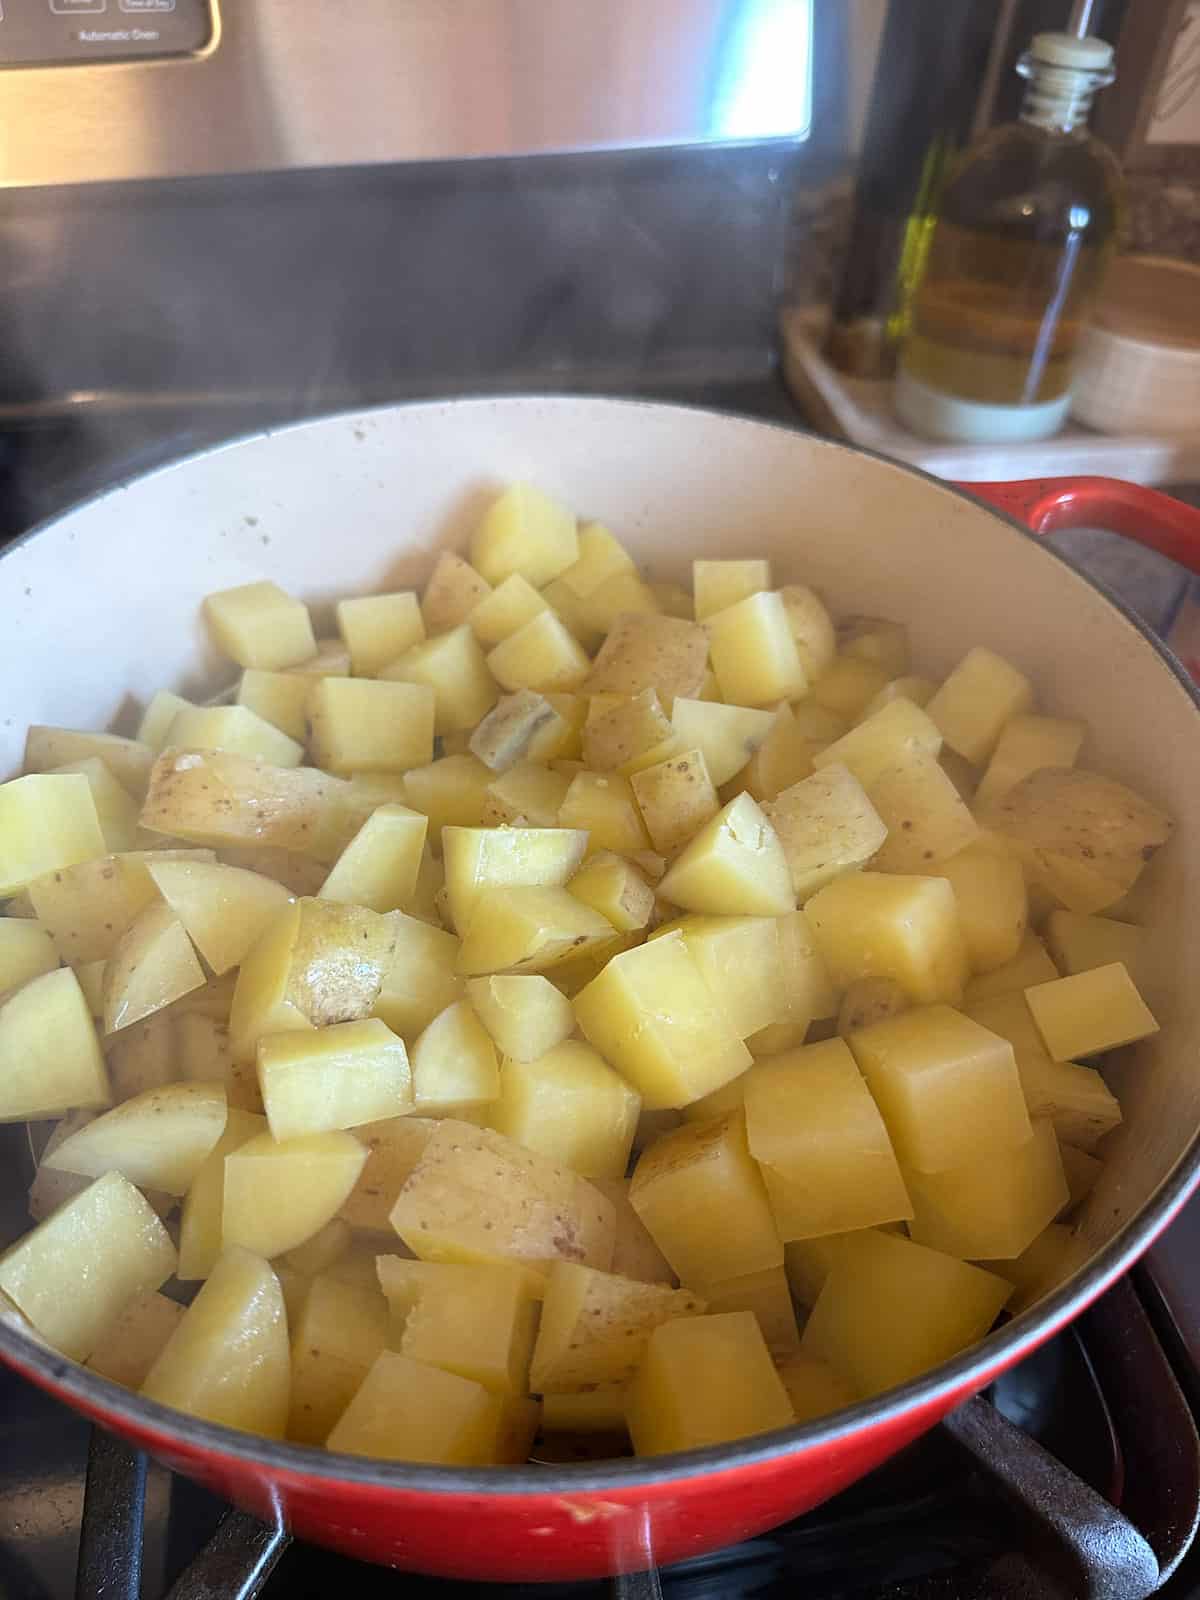 Diced cooked potatoes in a pot on the stove.